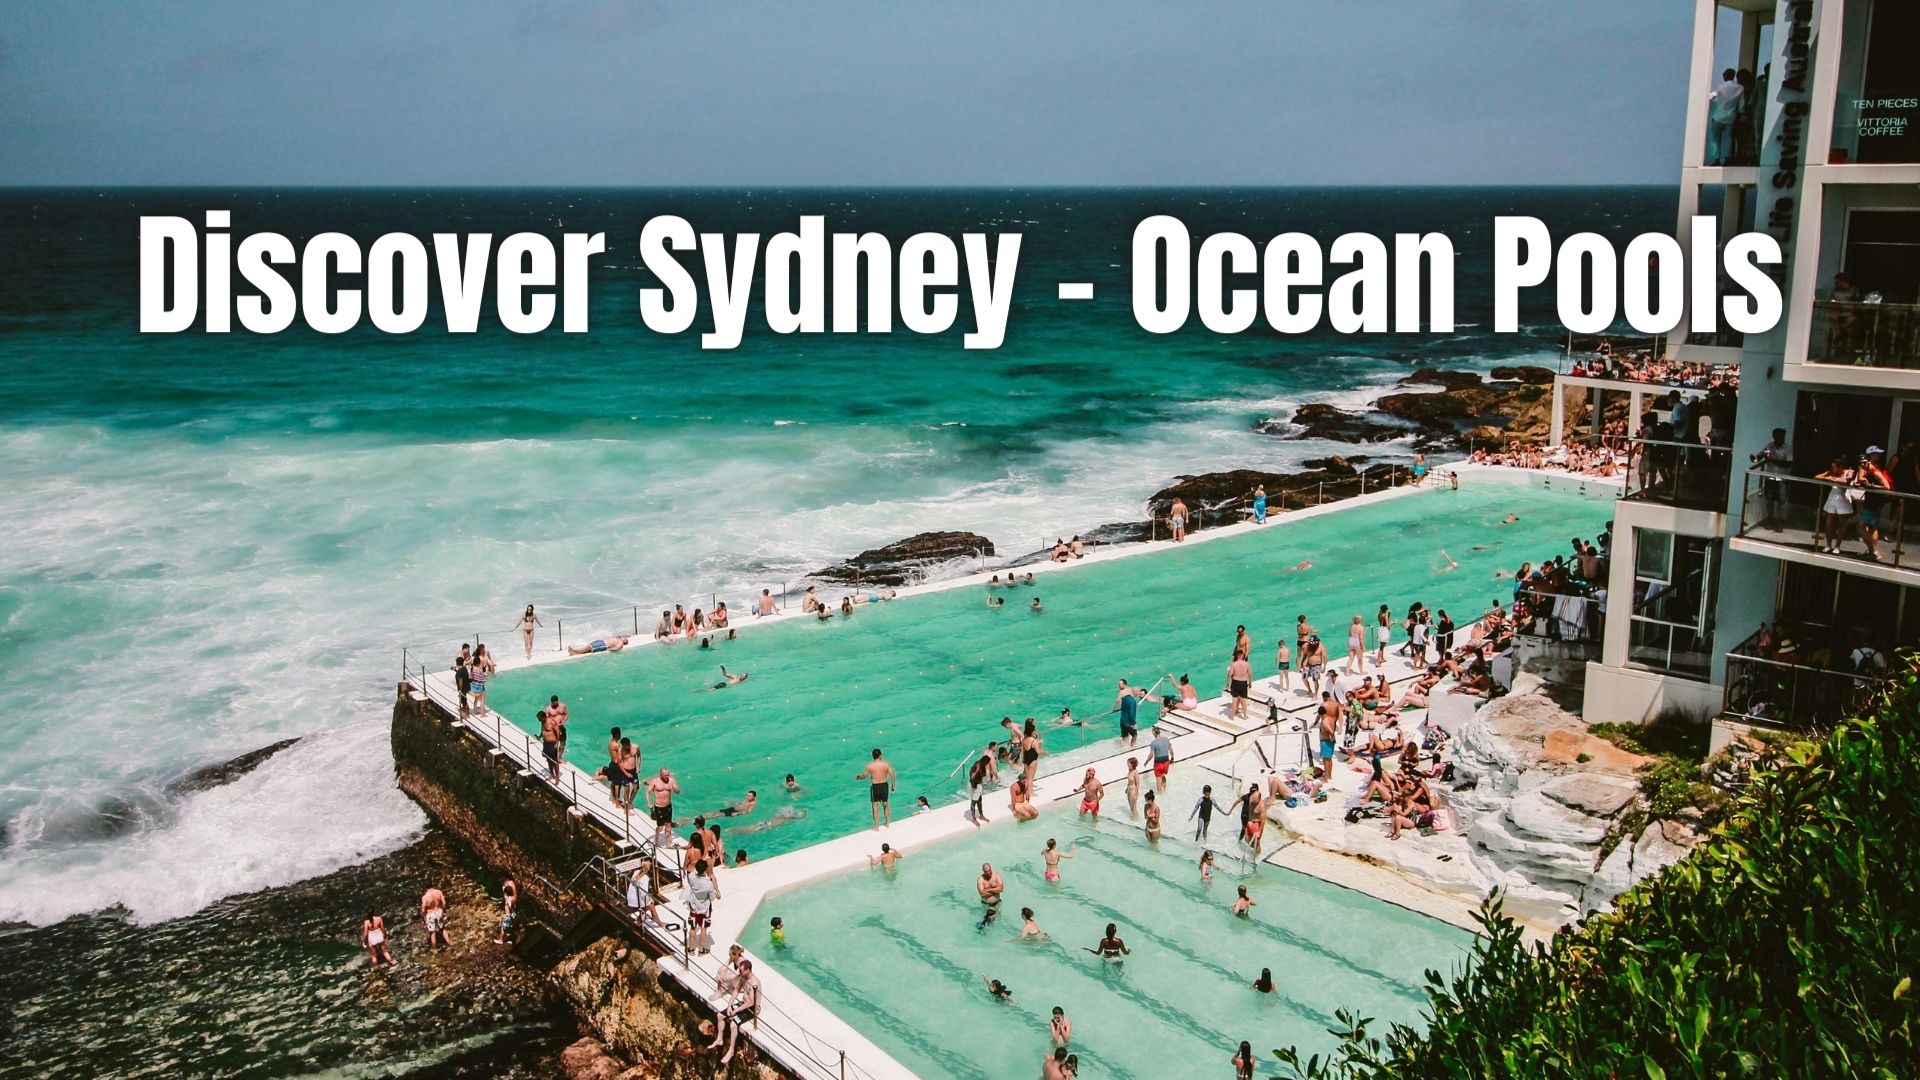 Discover the ocean pools around Sydney that are a must for swimming as well as offer some fantastic photo opportunities.